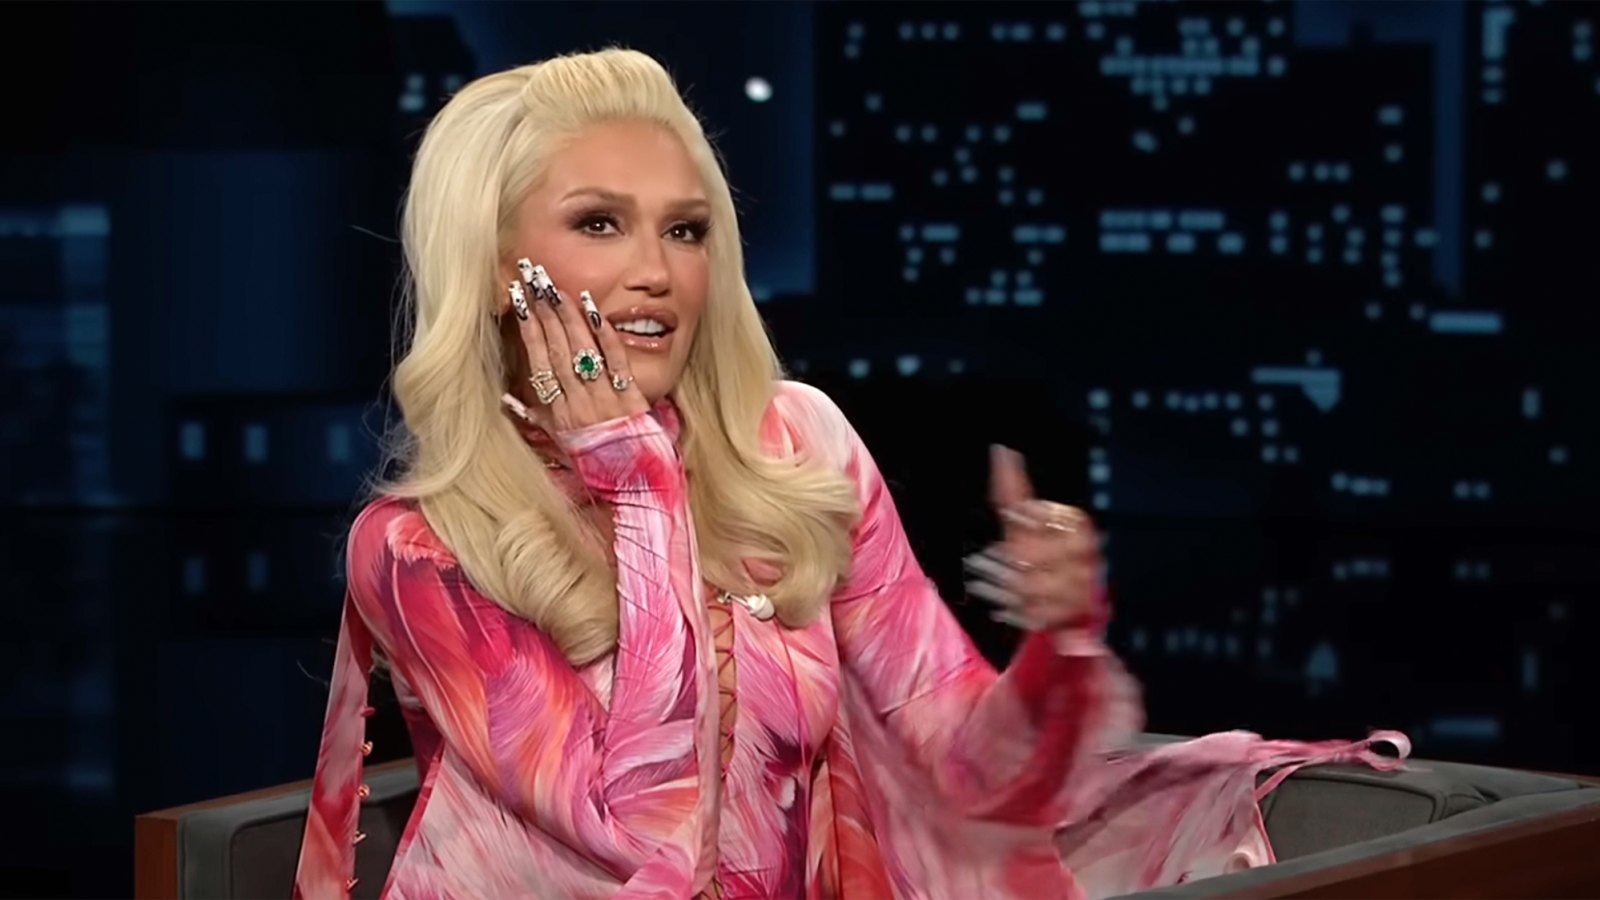 Gwen Stefani Gushes Over Huge Diamond and Emerald Ring Blake Shelton Gifted Her for Valentine’s Day